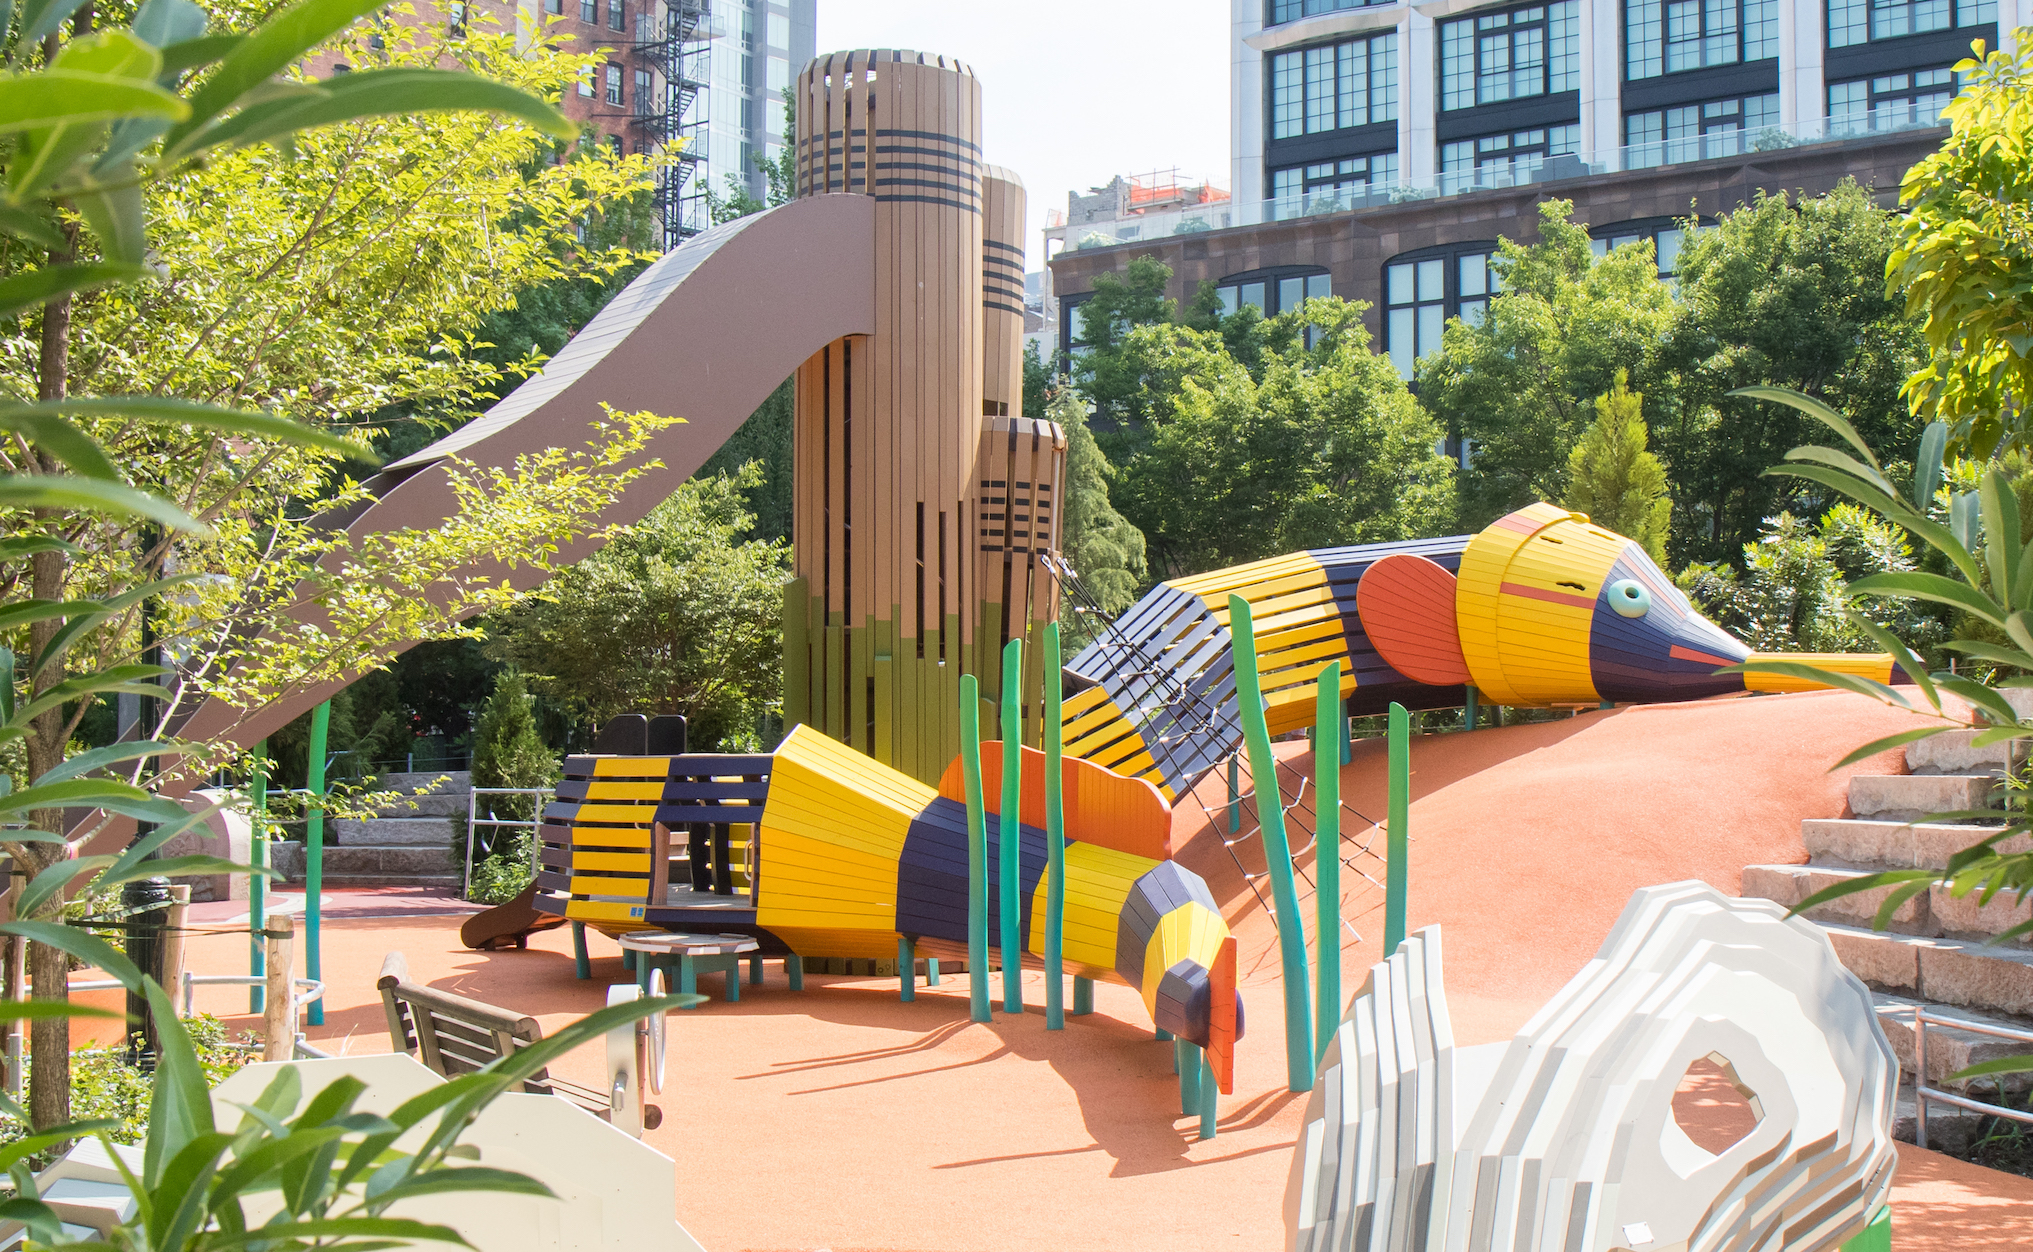 The Best Amusement Parks for Kids In and Near NYC